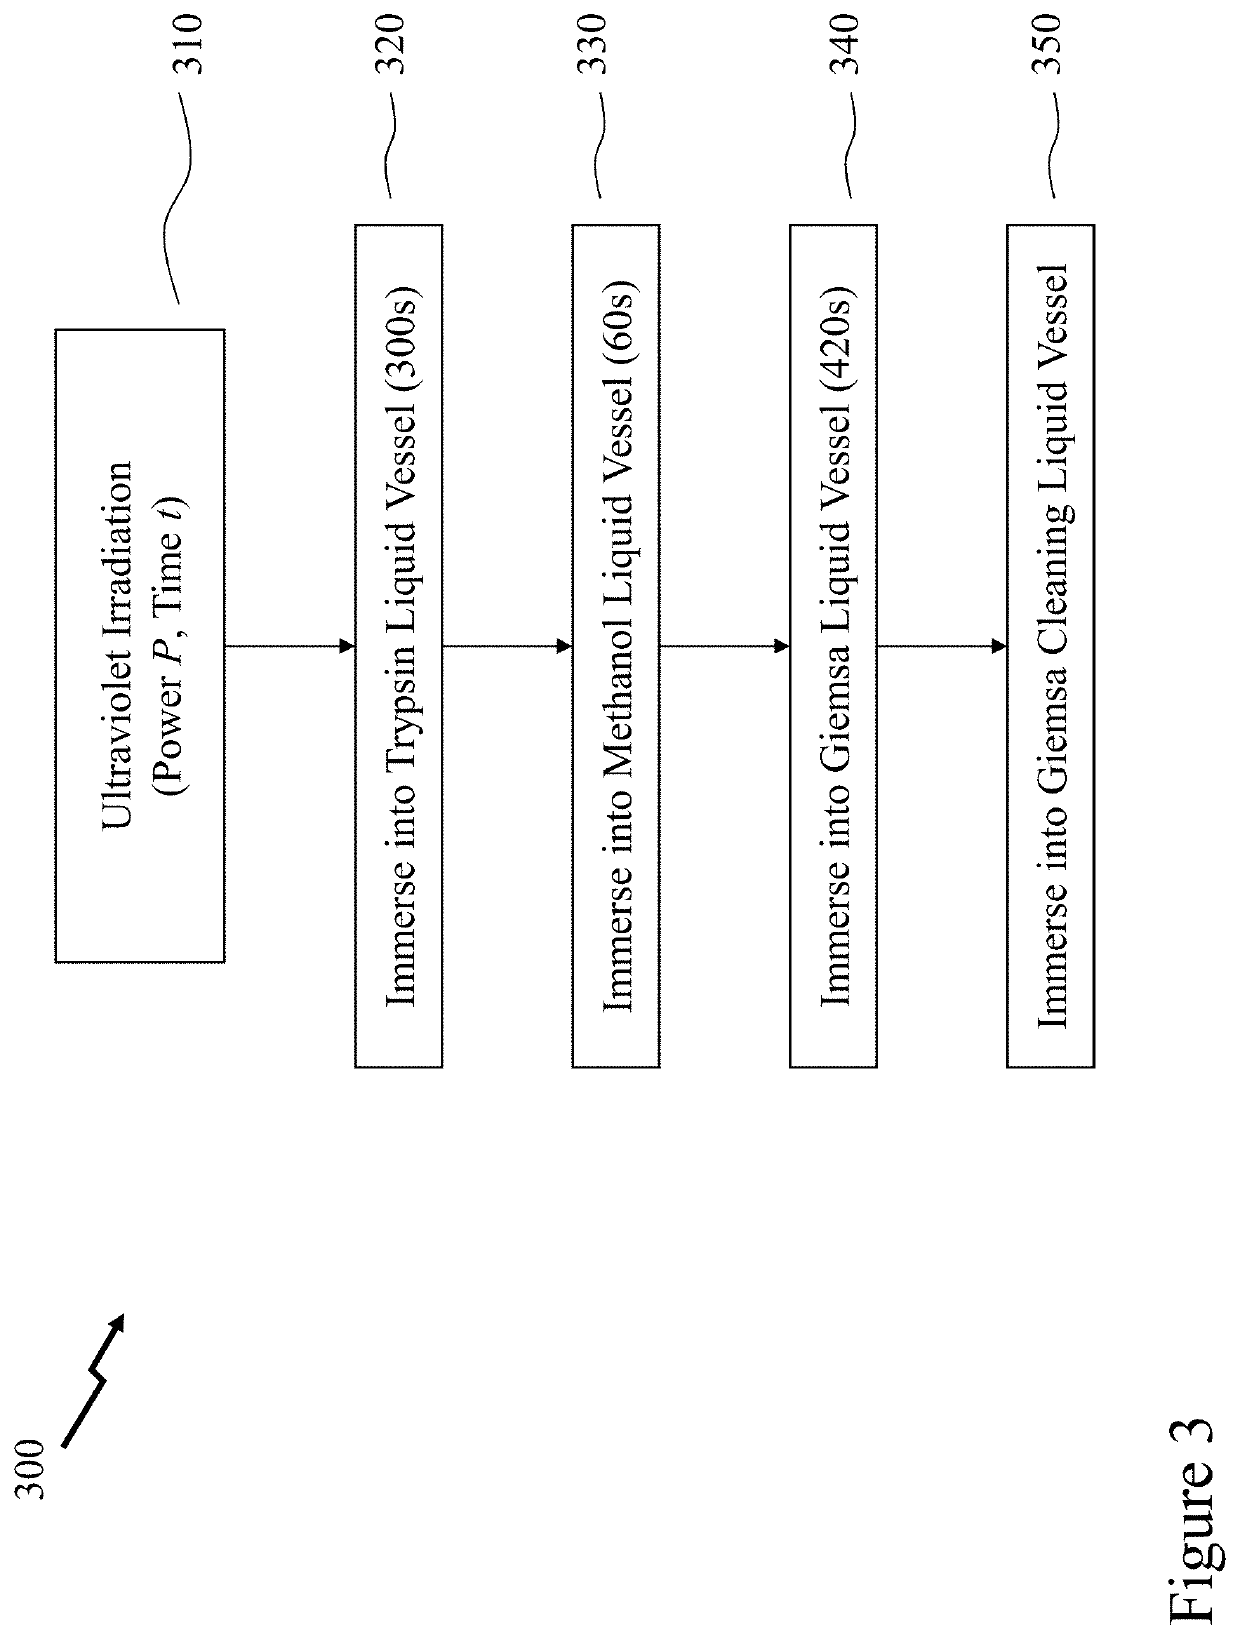 Staining and staining pre-treatment methods and devices